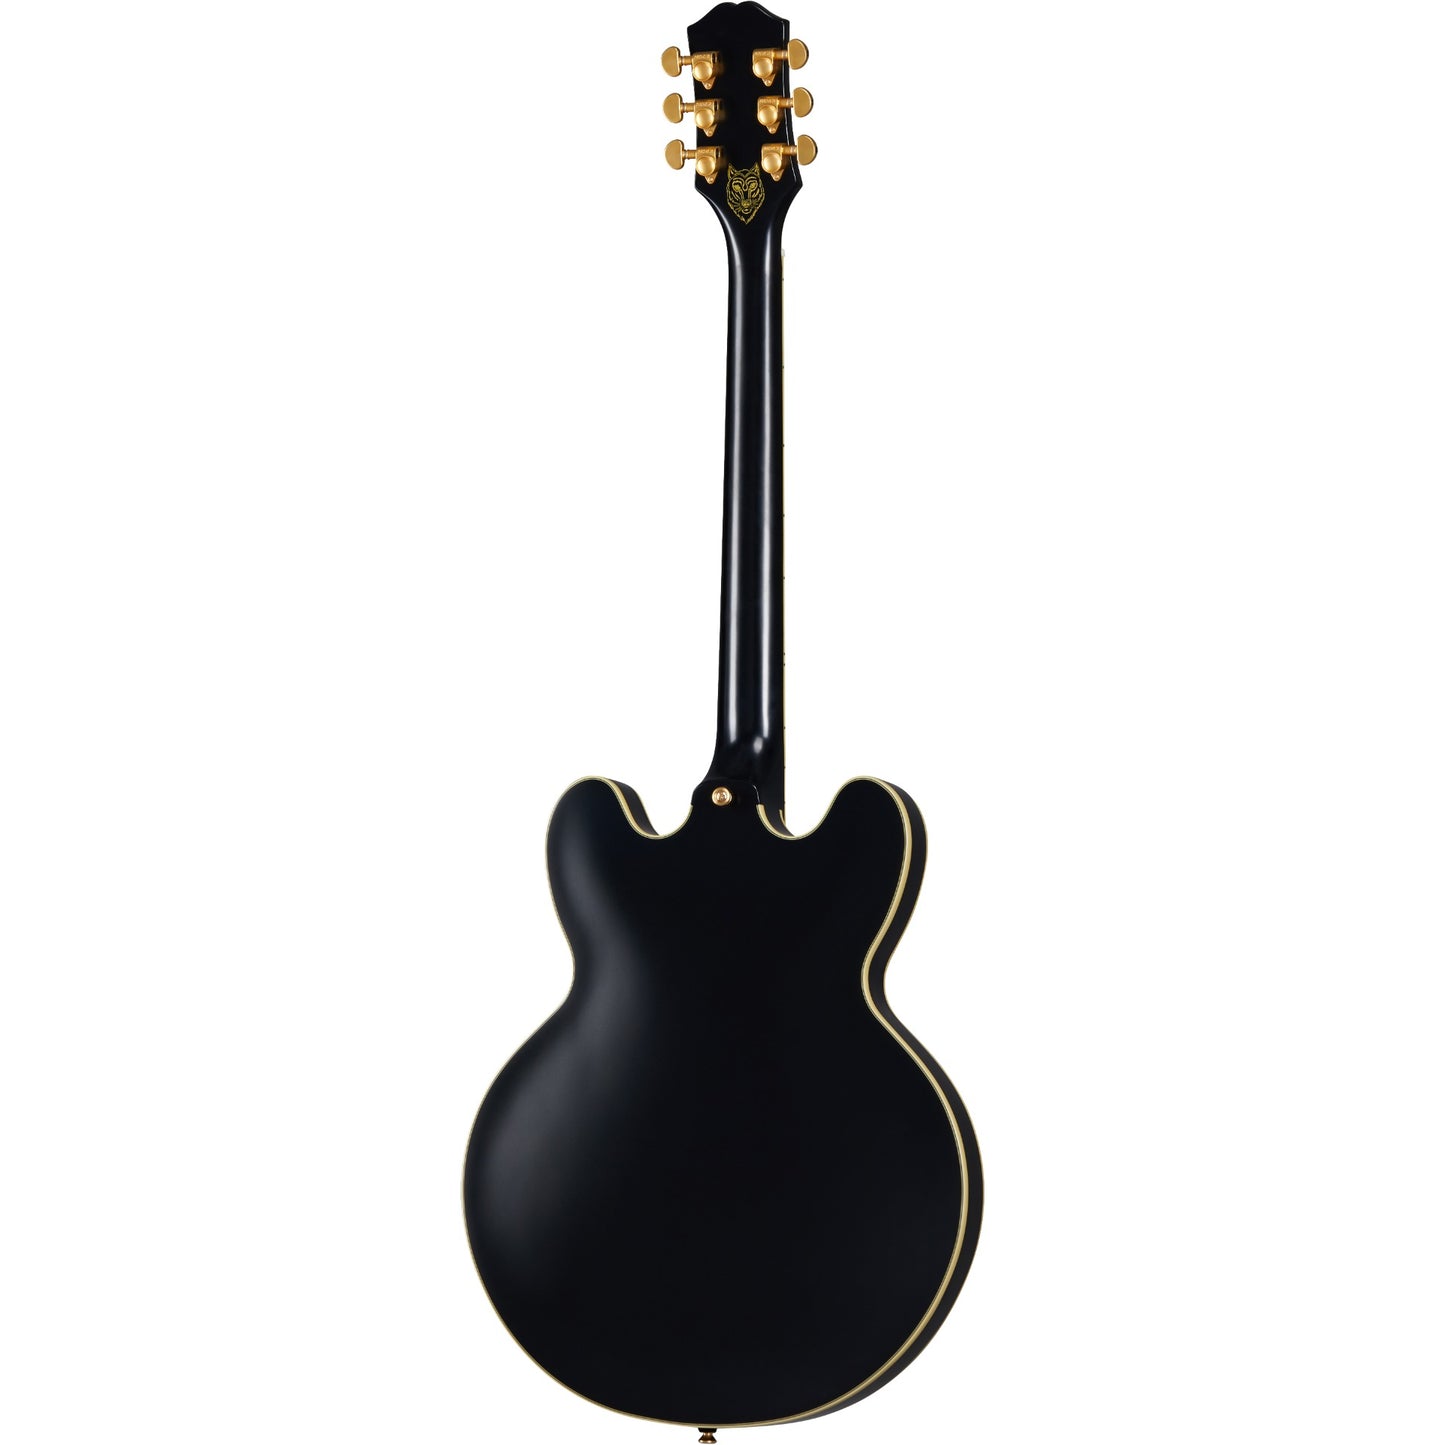 Epiphone Emily Wolfe Sheraton Stealth Semi Hollow Electric Guitar, Aged Black Gloss